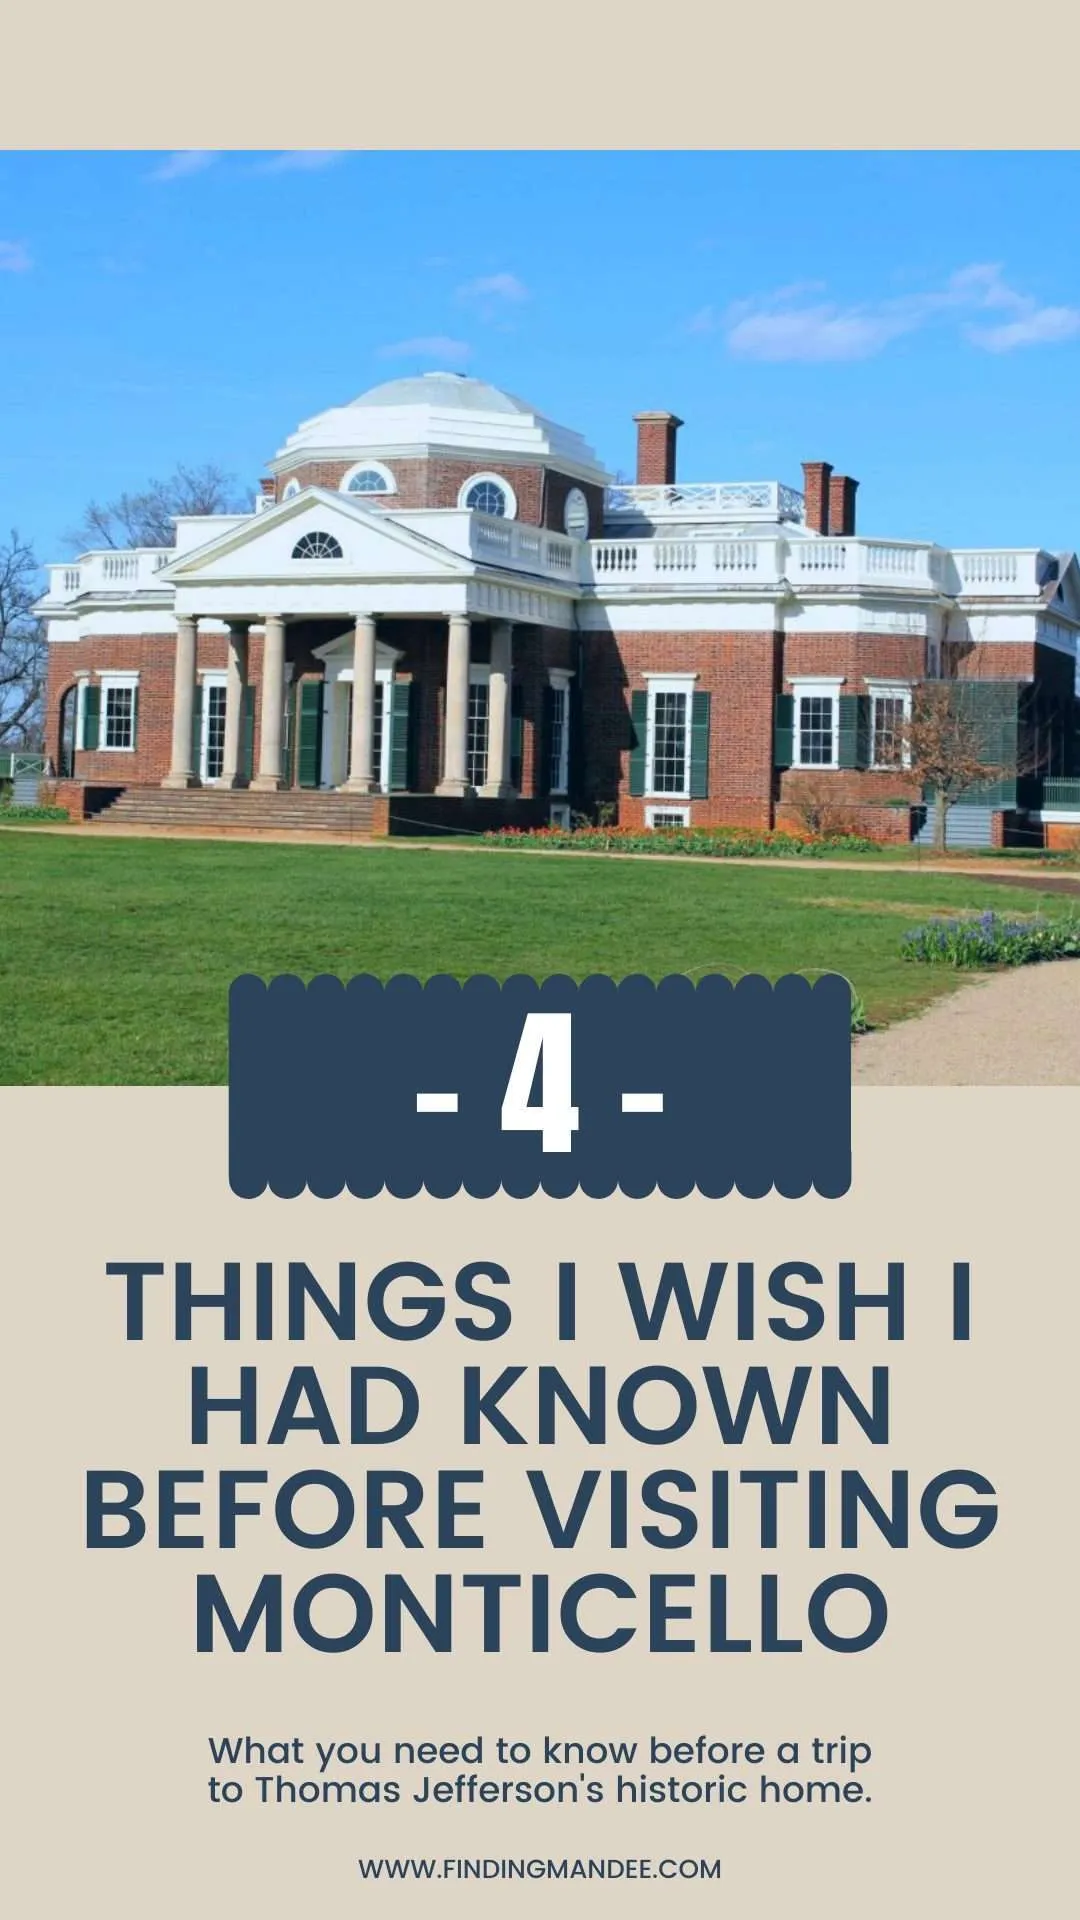 4 Things I Wish I Had Known Before Visiting Monticello | Finding Mandee